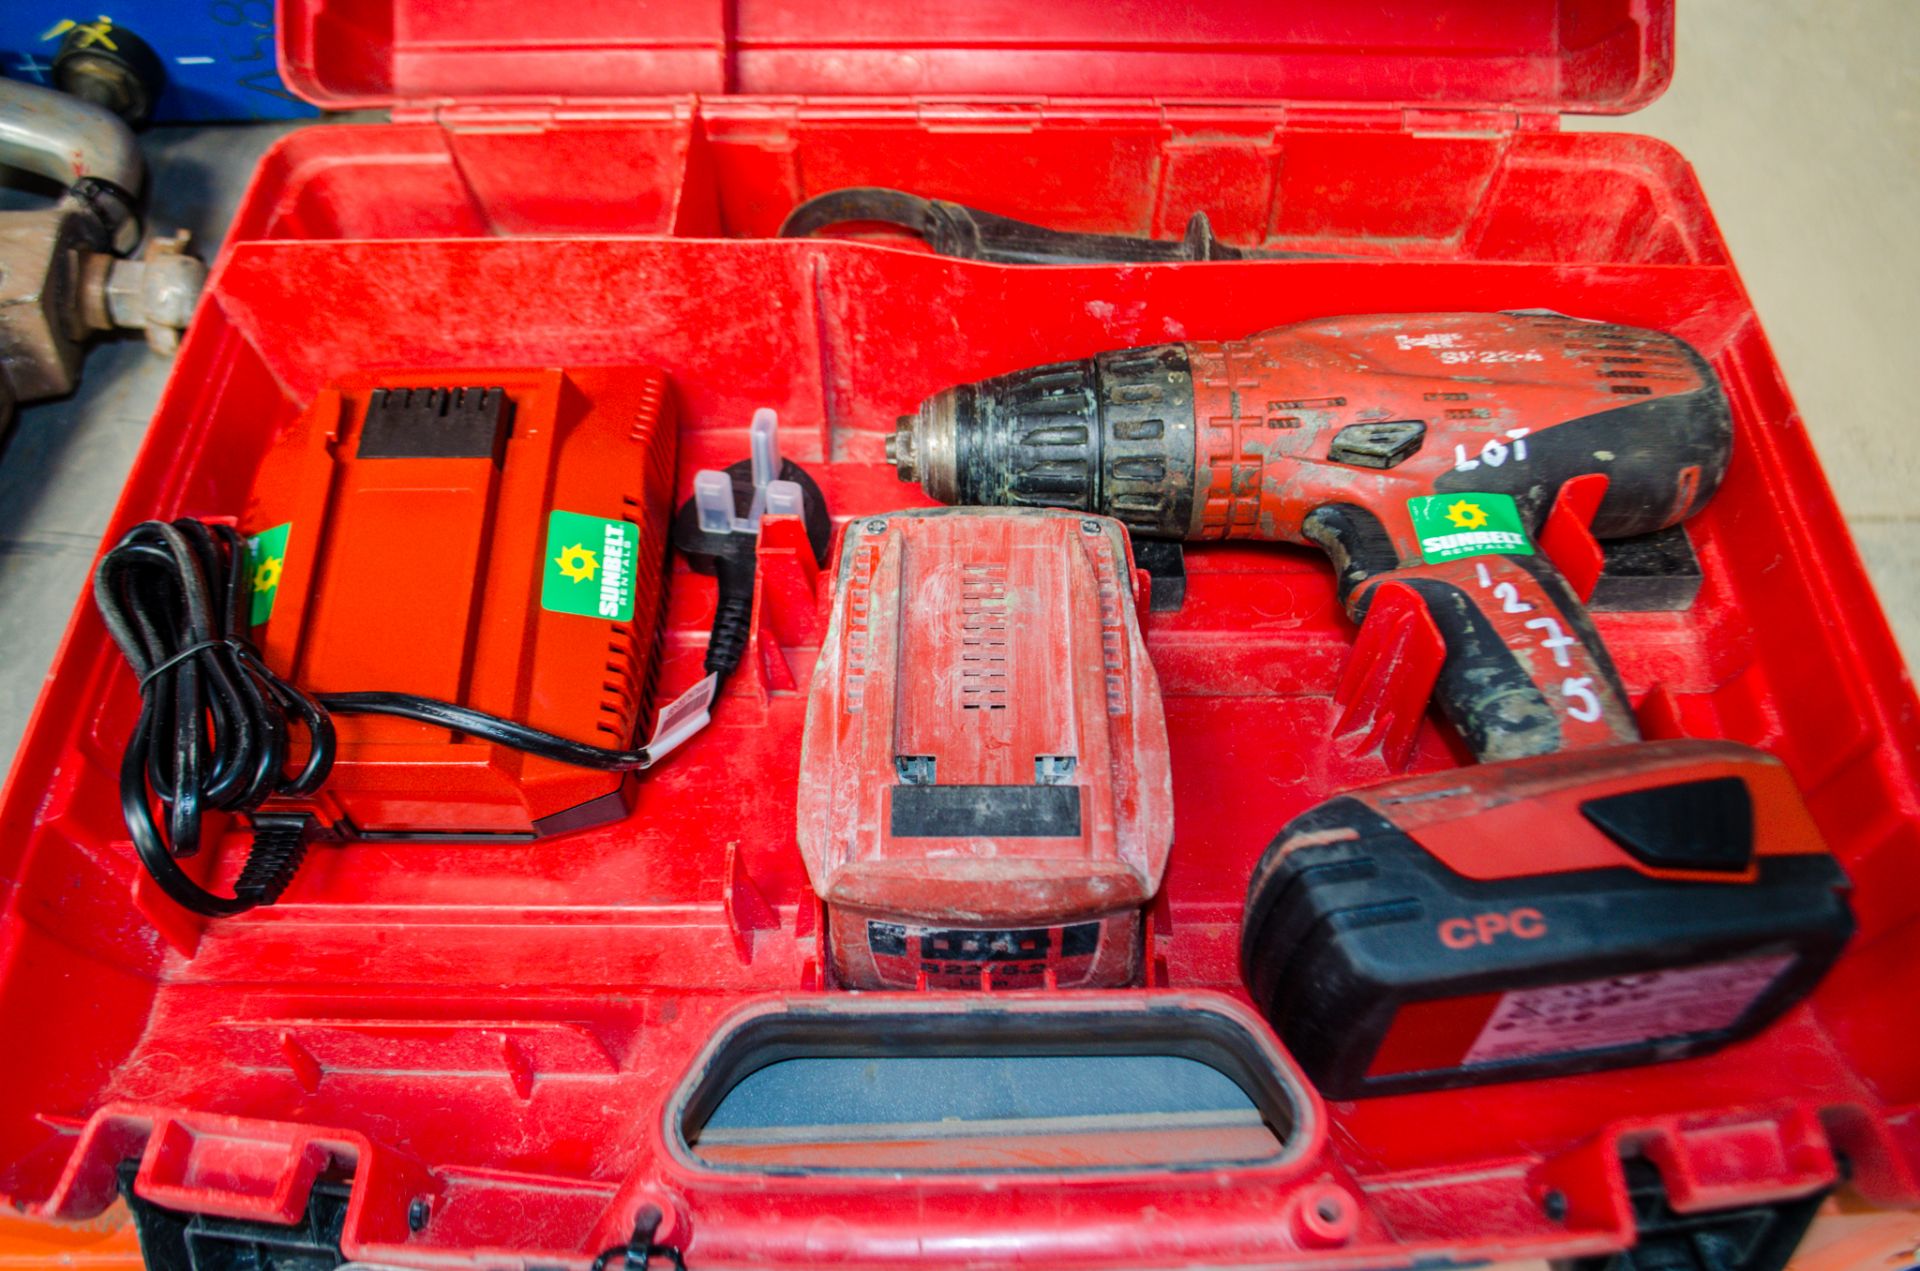 Hilti SH22-A 22v cordless power drill c/w 2 batteries, charger and carry case A753098